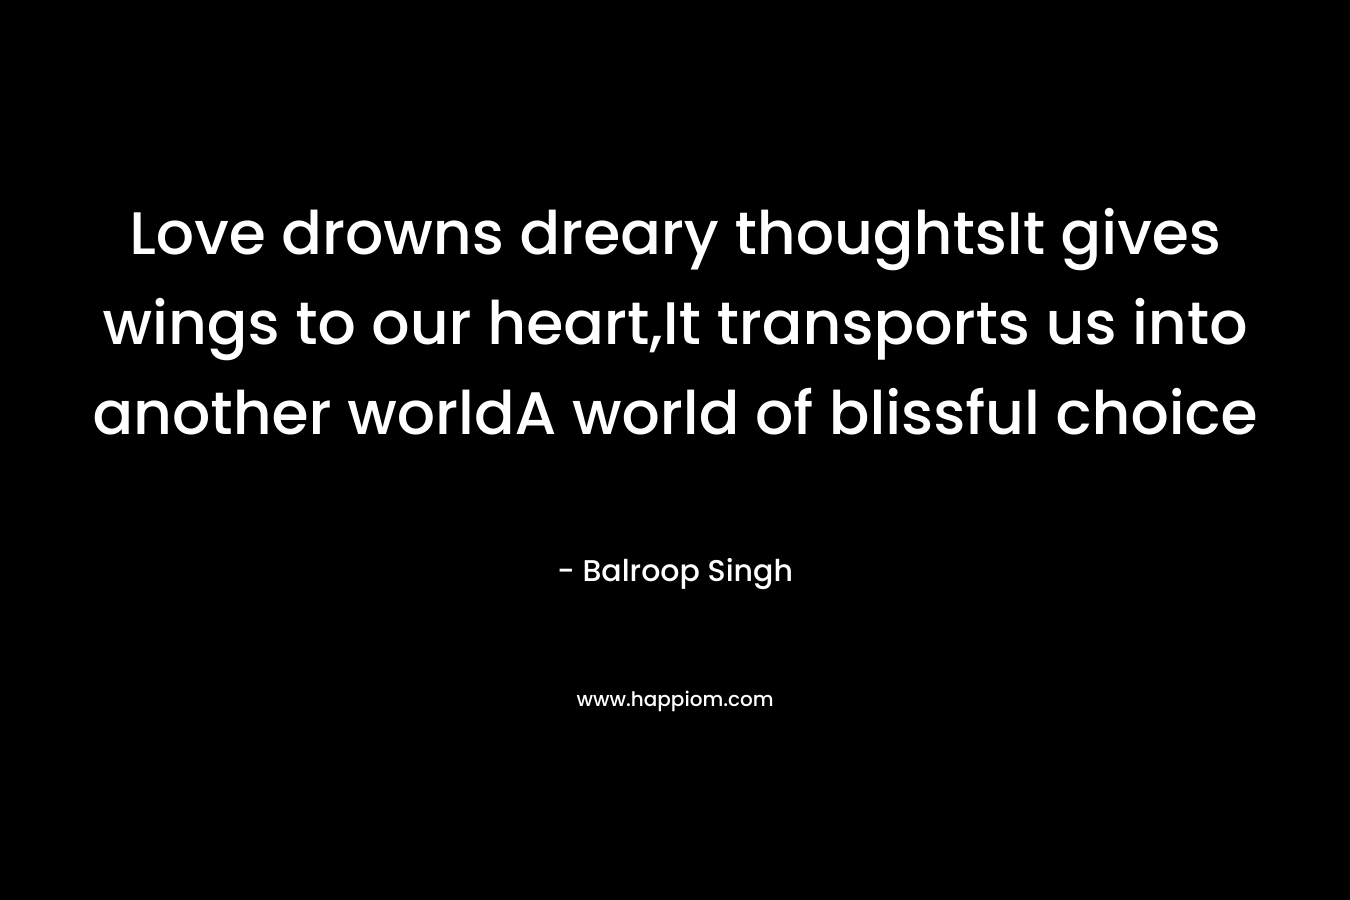 Love drowns dreary thoughtsIt gives wings to our heart,It transports us into another worldA world of blissful choice